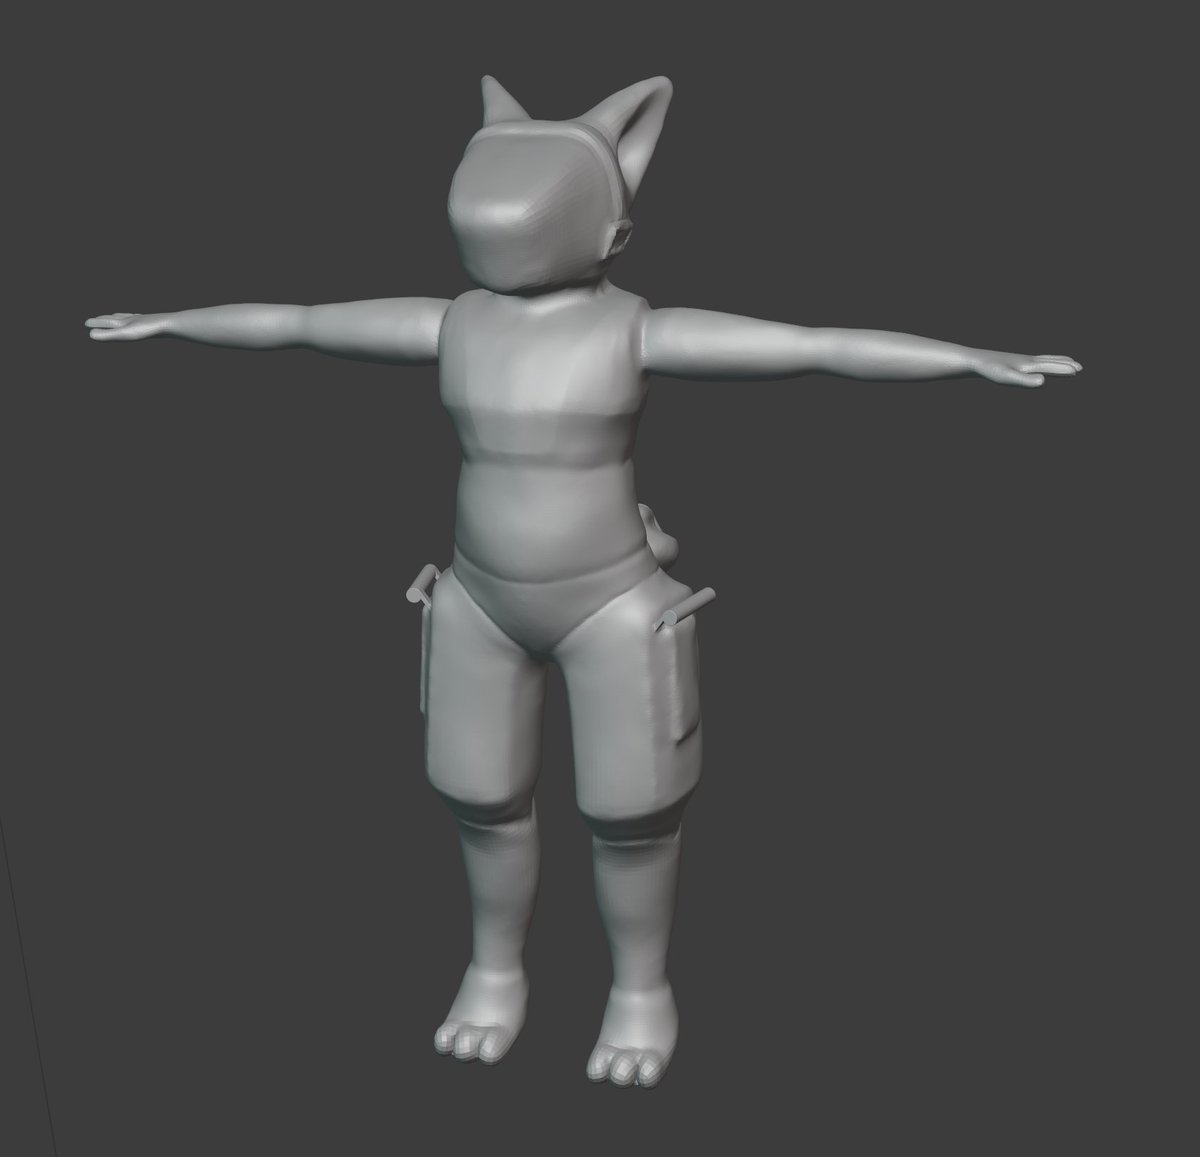 Tail and shoulder pads are the only things that are left now. The rest of the mesh is finished